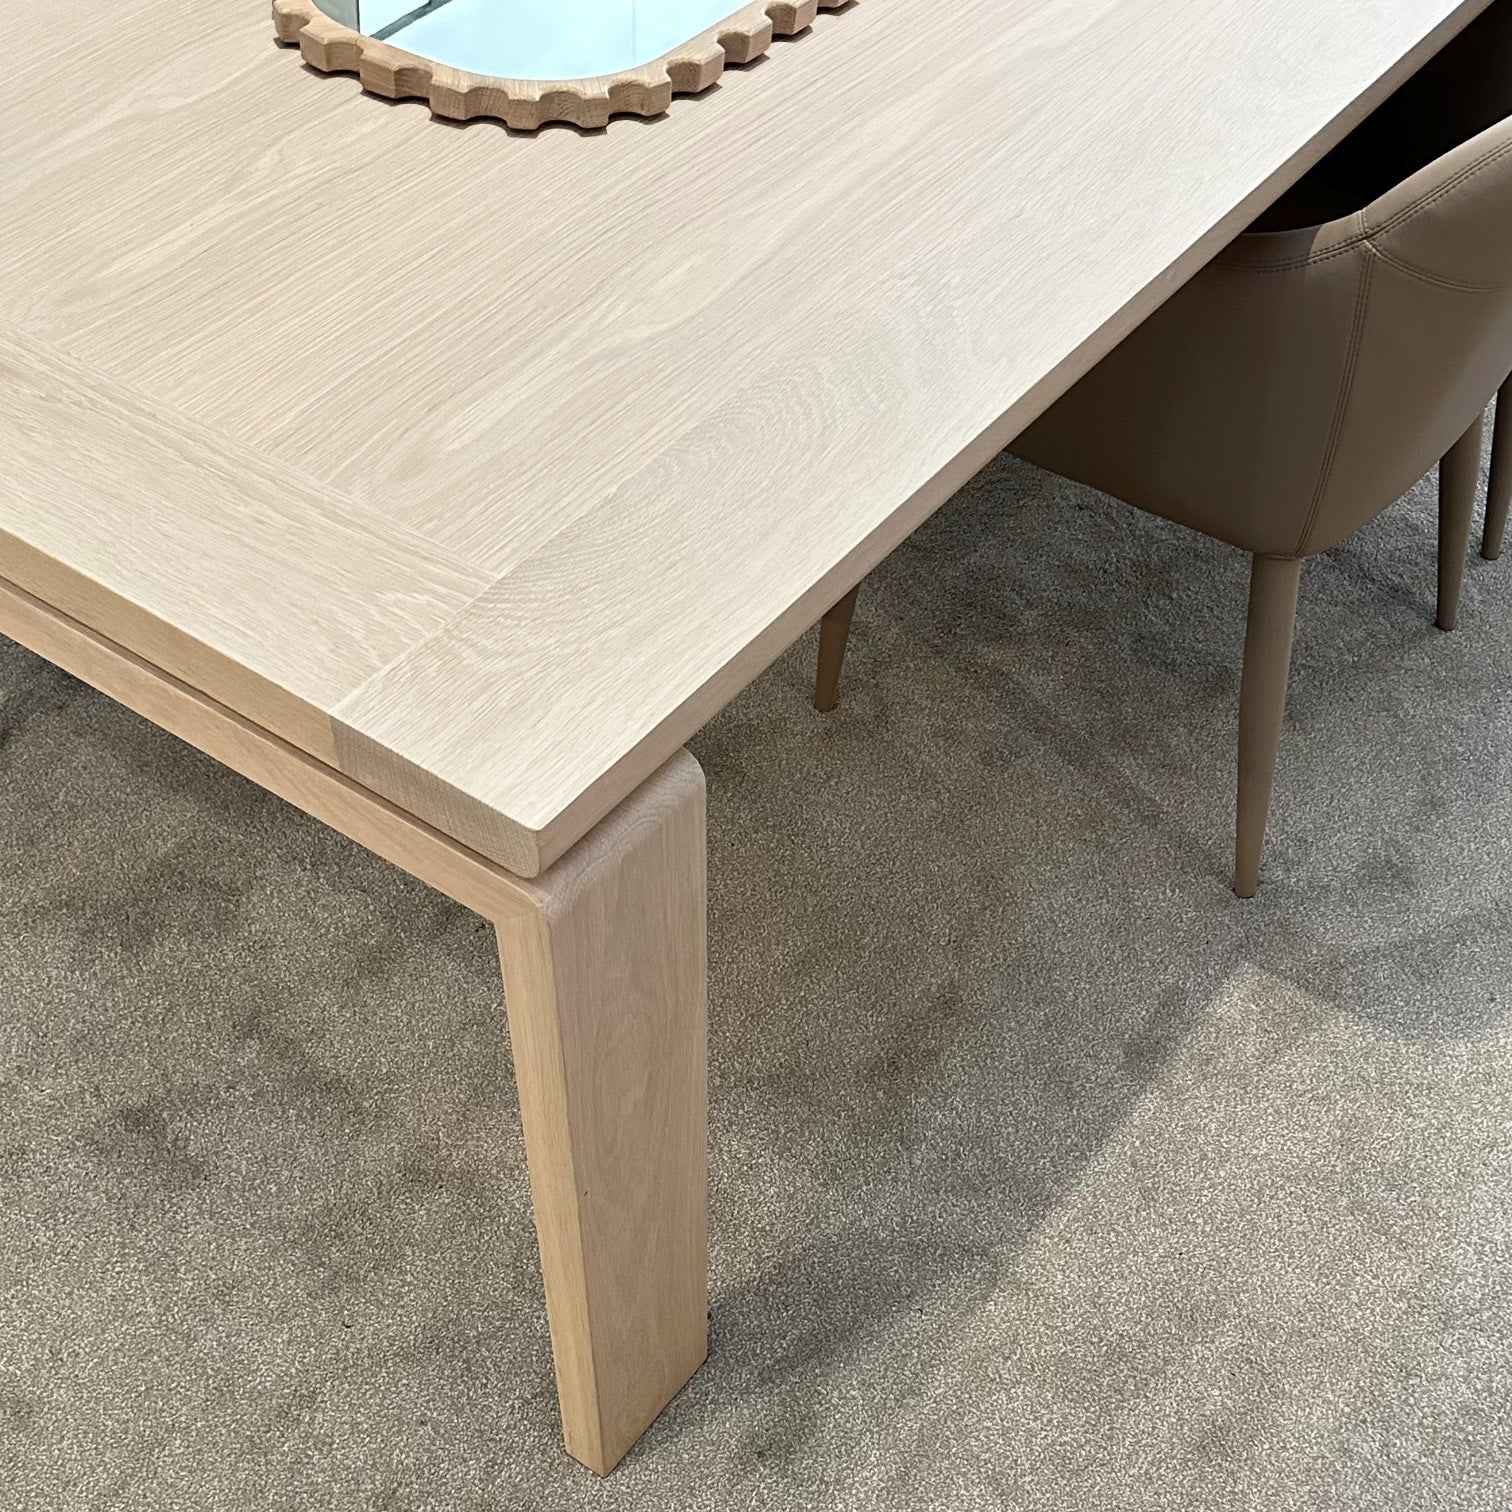 April Dining Table 2.0 - Zuster Furniture